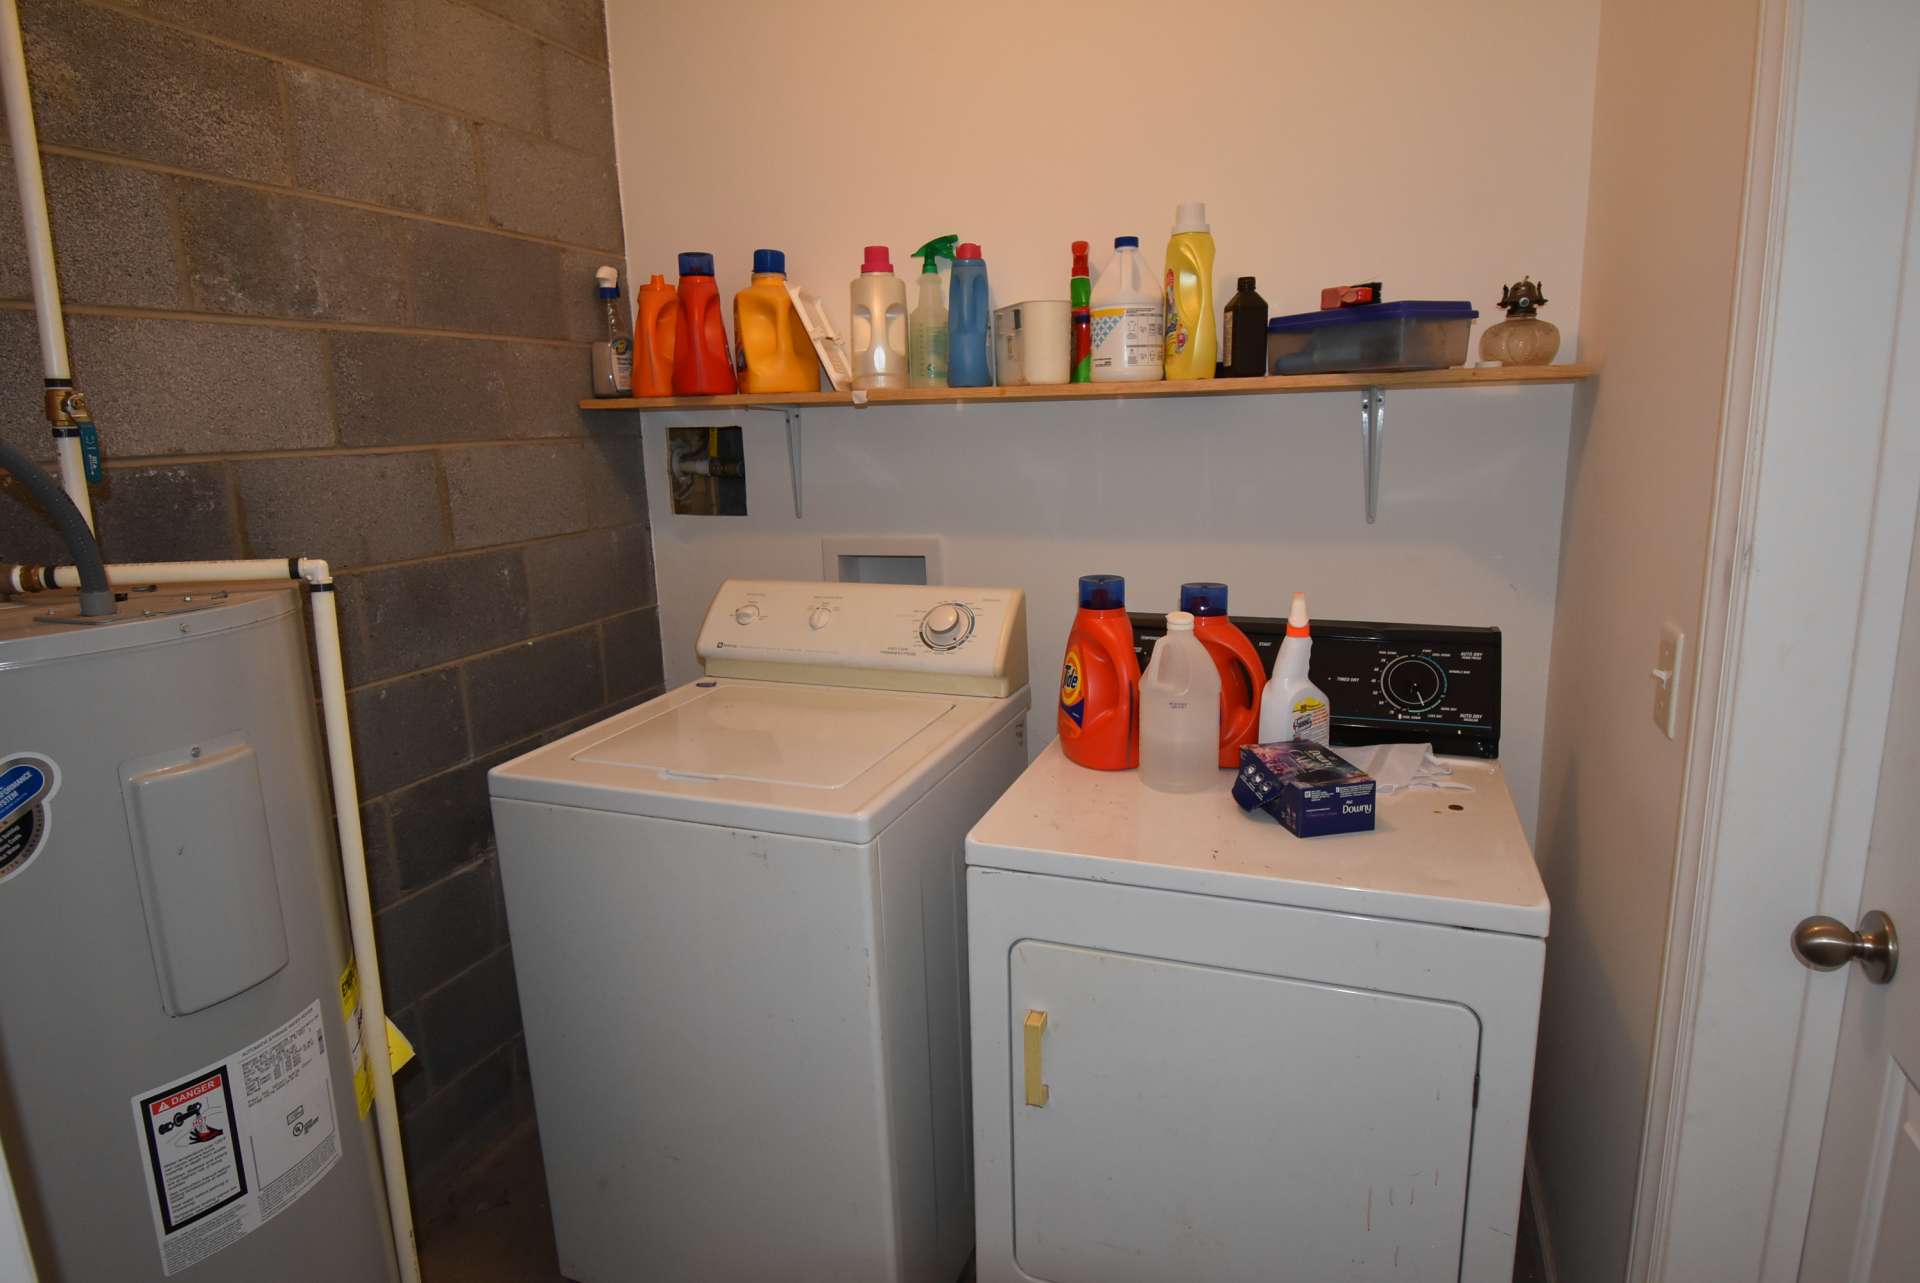 The laundry room is on the lower level, along with a large storage closet.